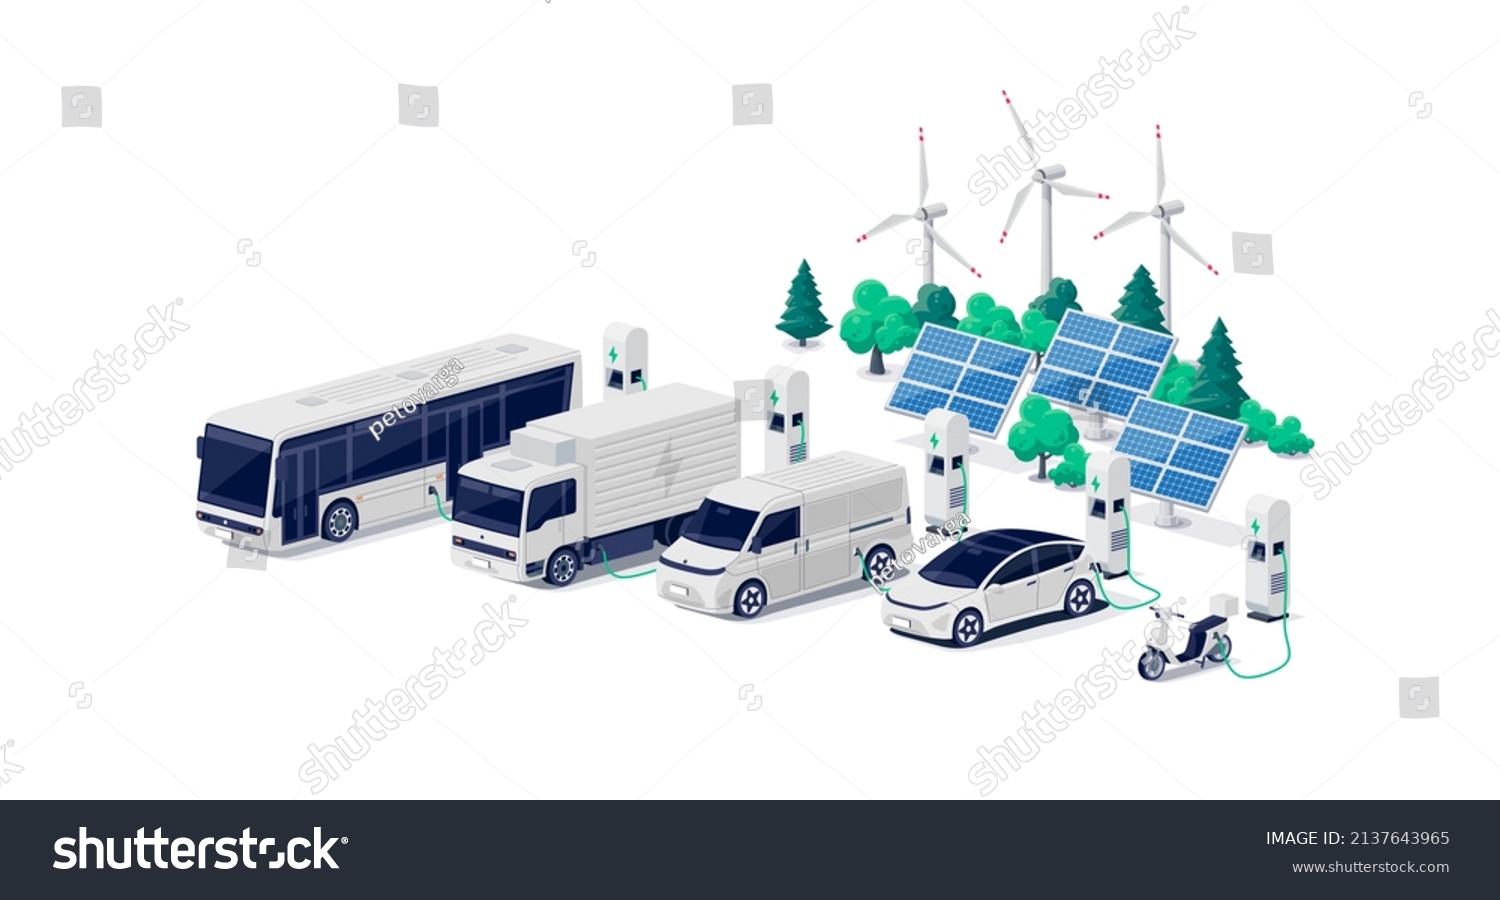 Company electric cars fleet charging on parking lot with fast charger station and many charger stalls. Bus, truck, van, motorcycle, business vehicles on renewable solar wind energy in network grid. #2137643965